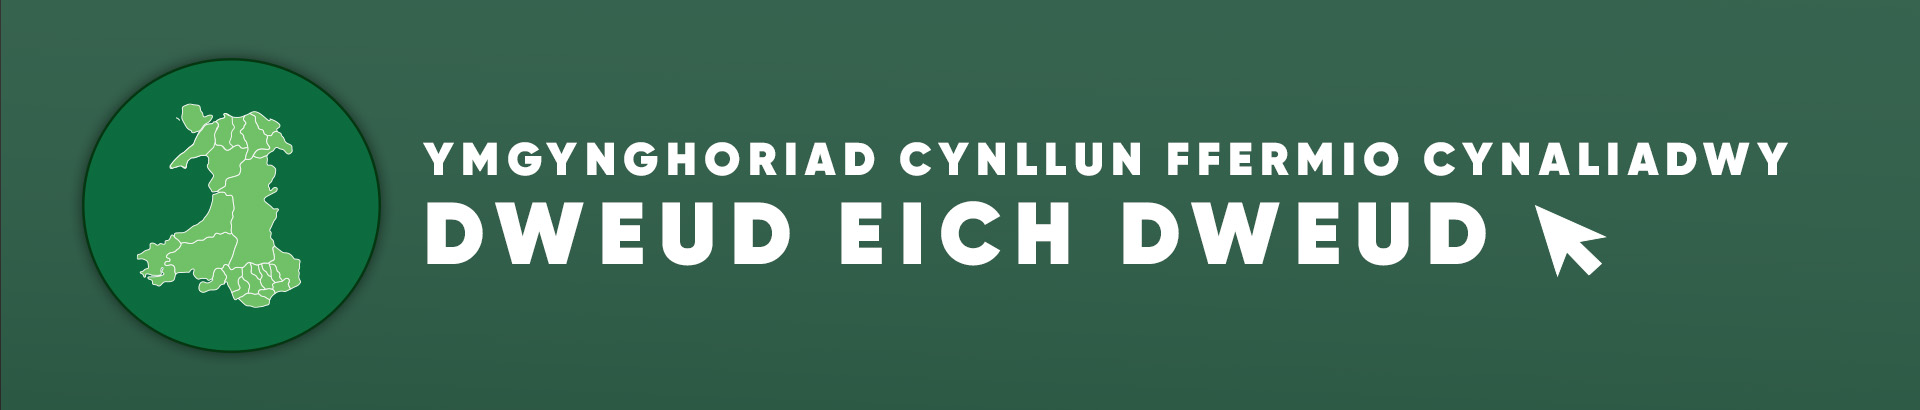 Web Cover Image WELSH